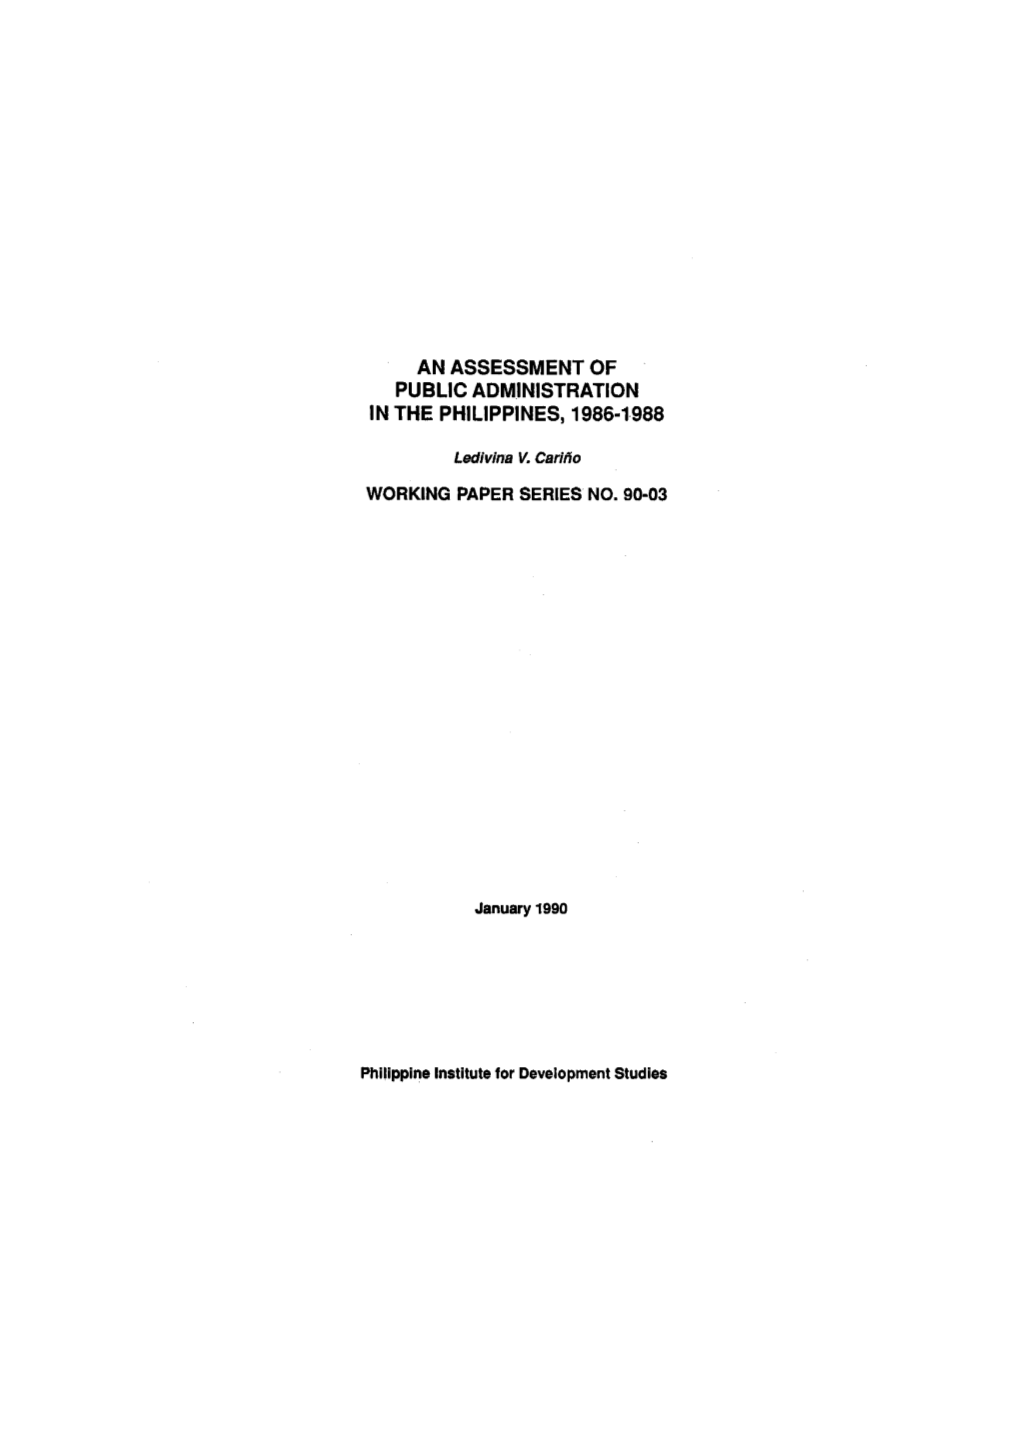 An Assessment of Public Administration in the Philippines, 1986-1988